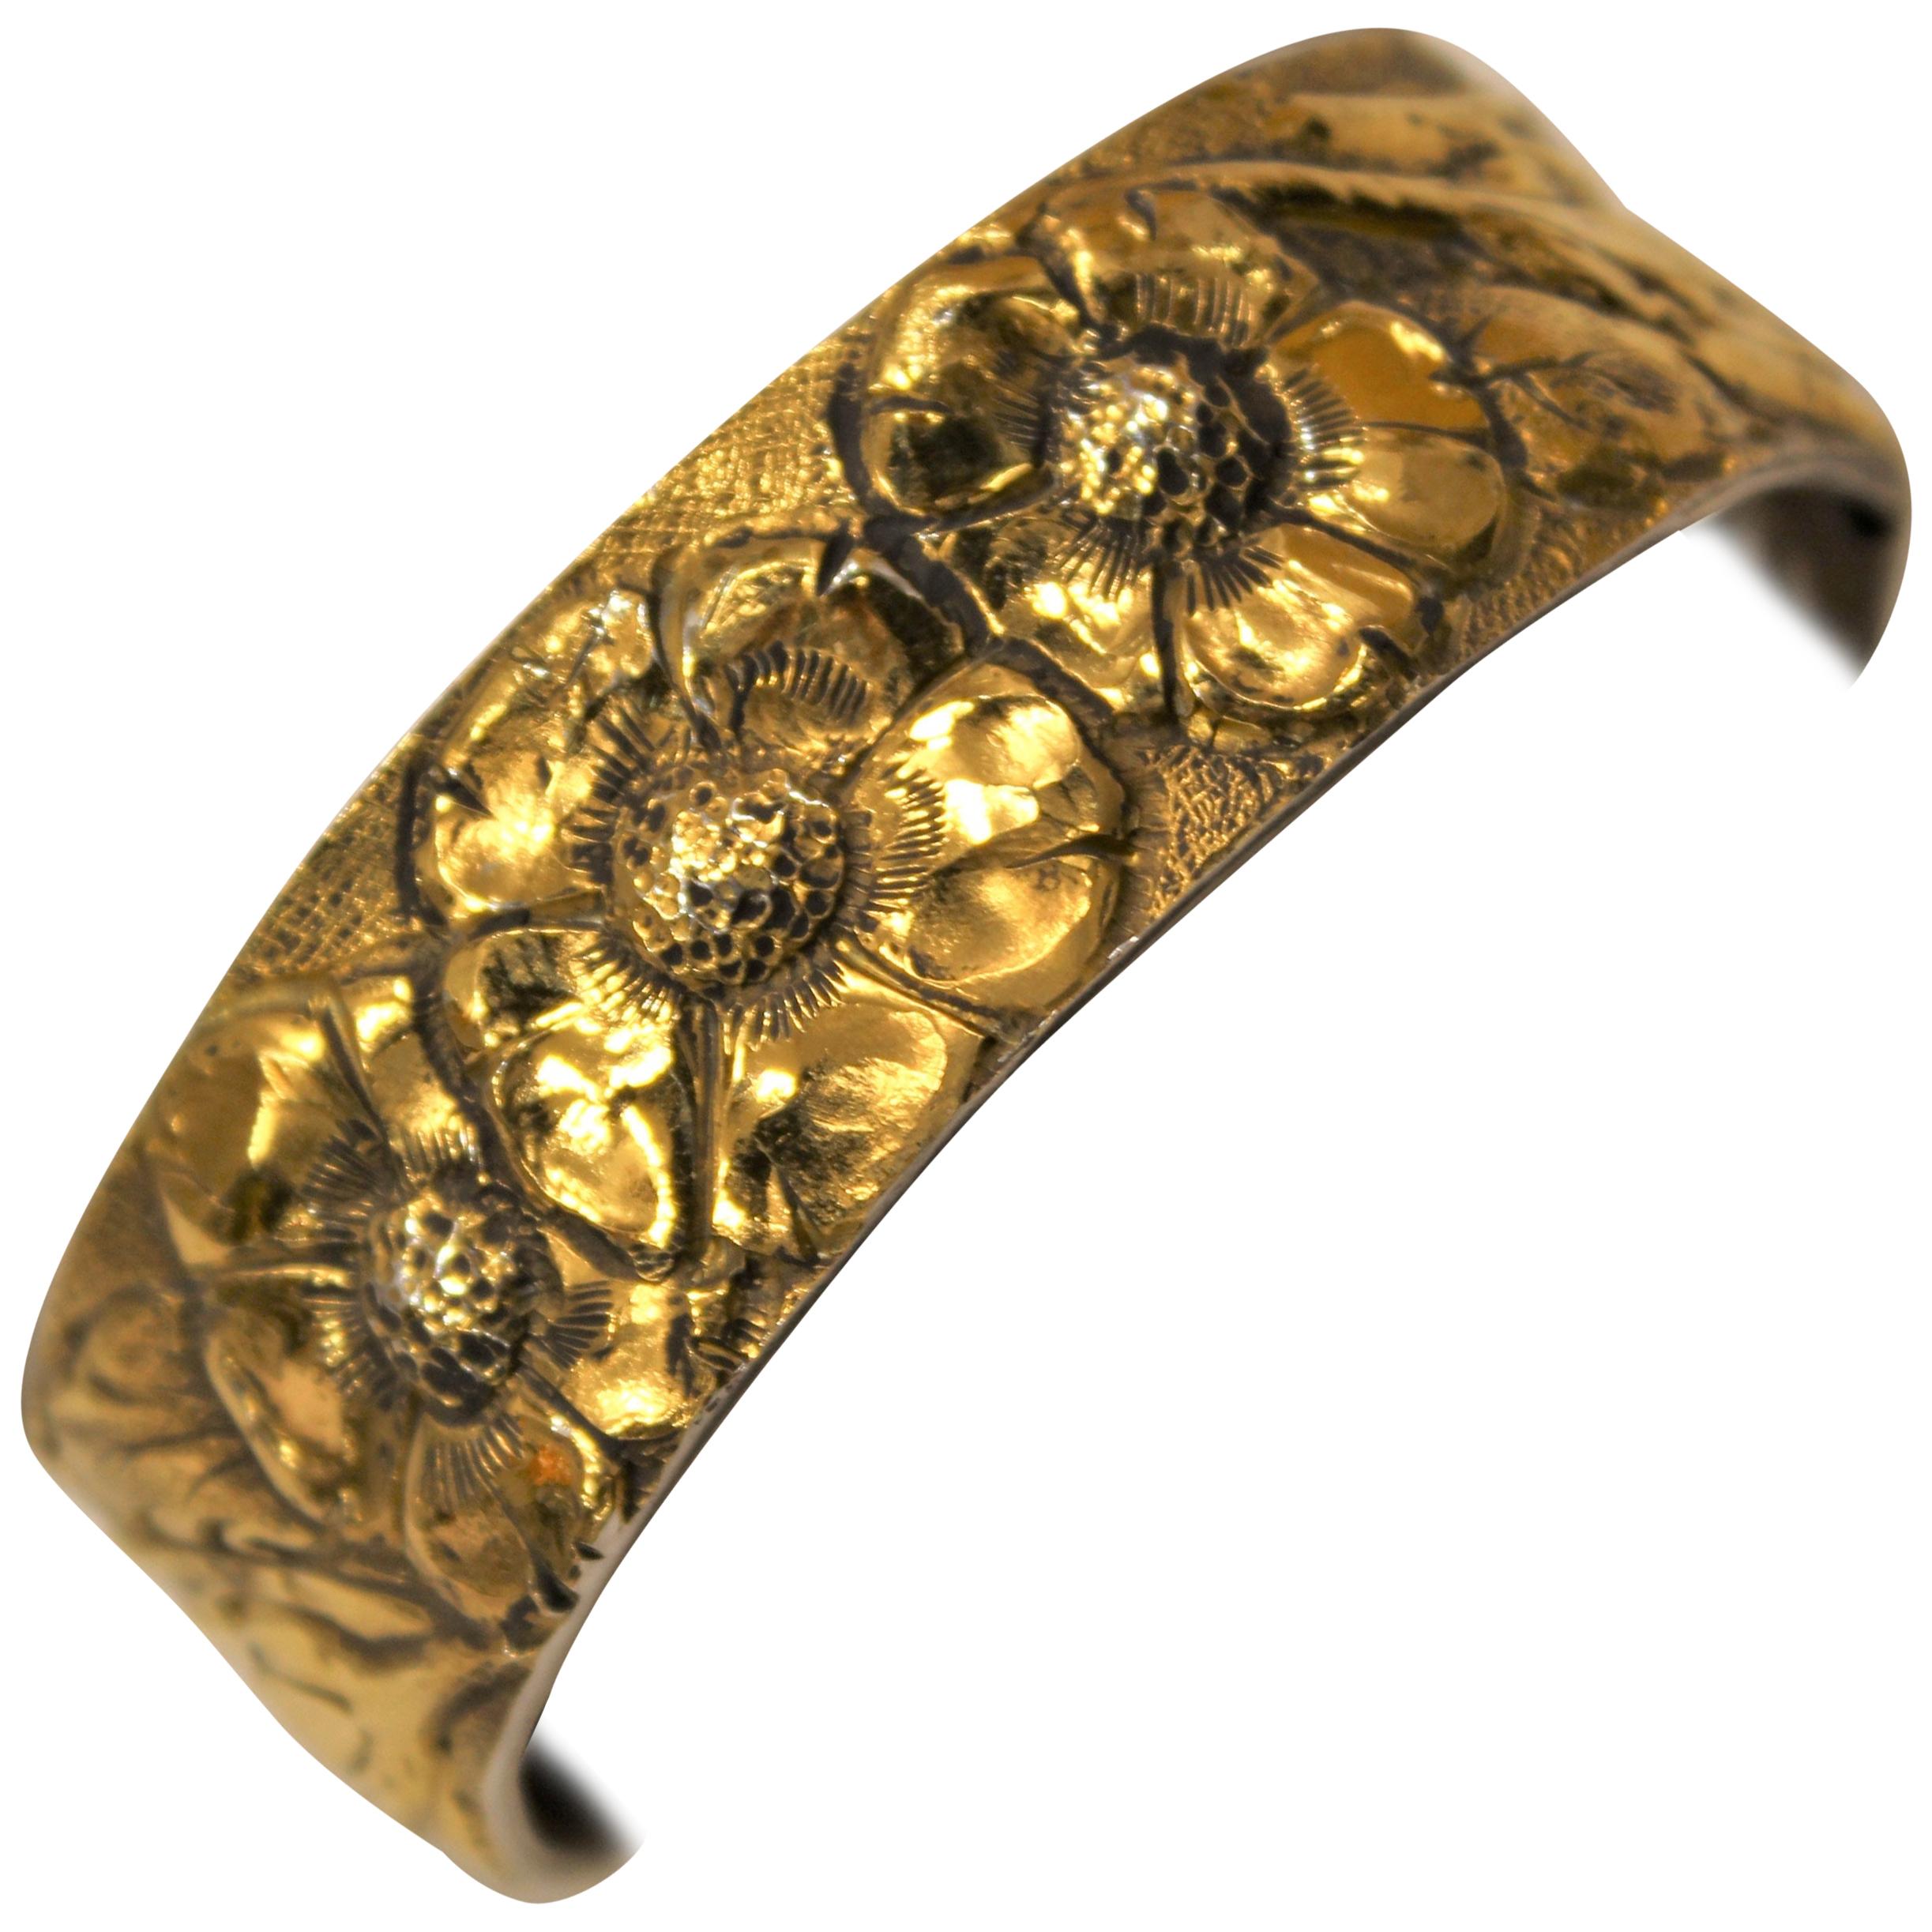 Cuff Bracelet, Pomegranate, 24 Karat Gold, Solid Silver, Handcrafted, Italy